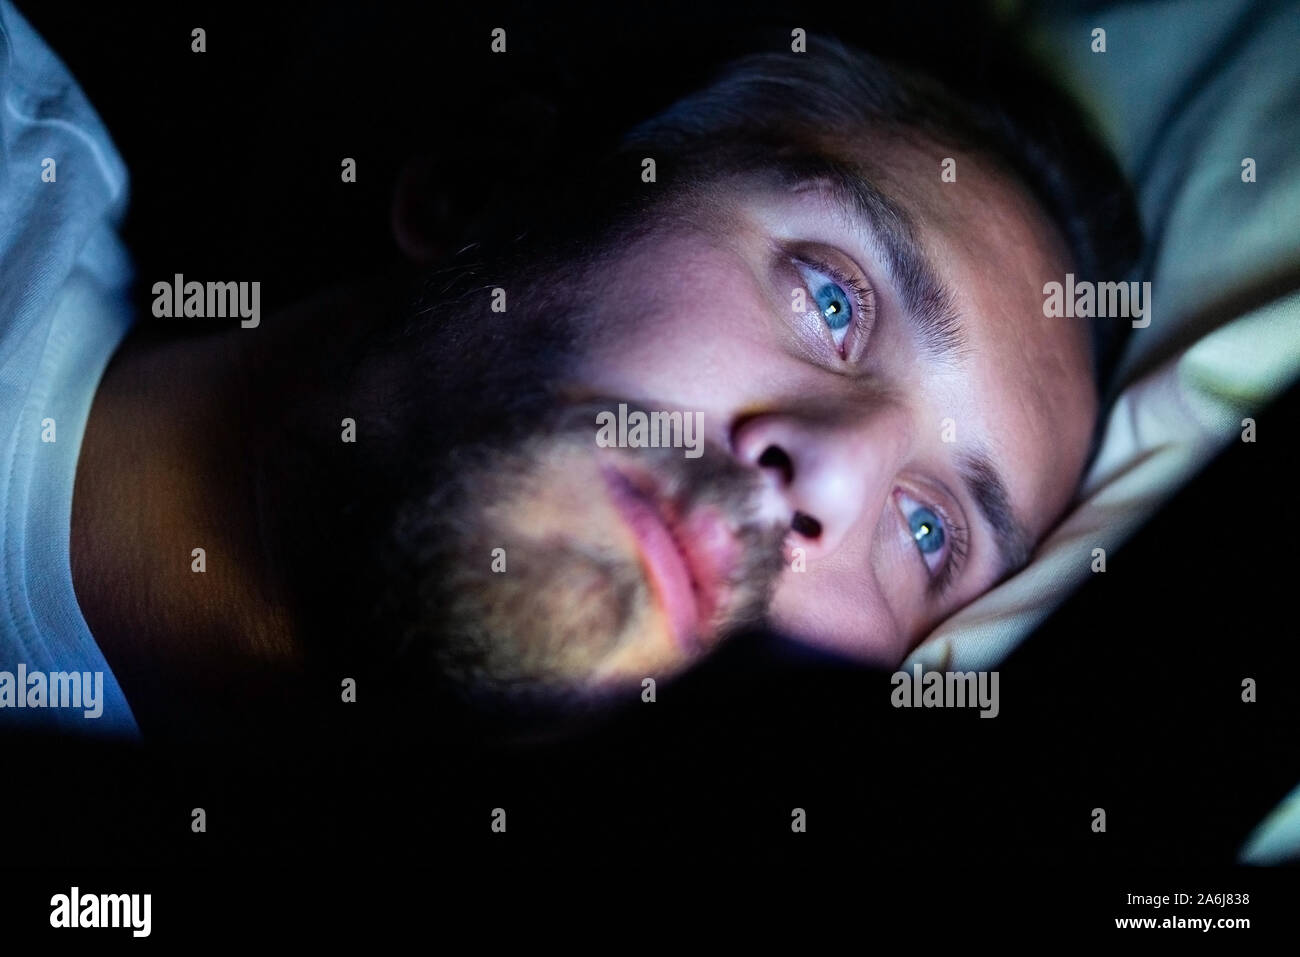 Bearded caucasian male is watching something on his mobile phone in bed at night. He is clearly very tired but cannot sleep. Stock Photo